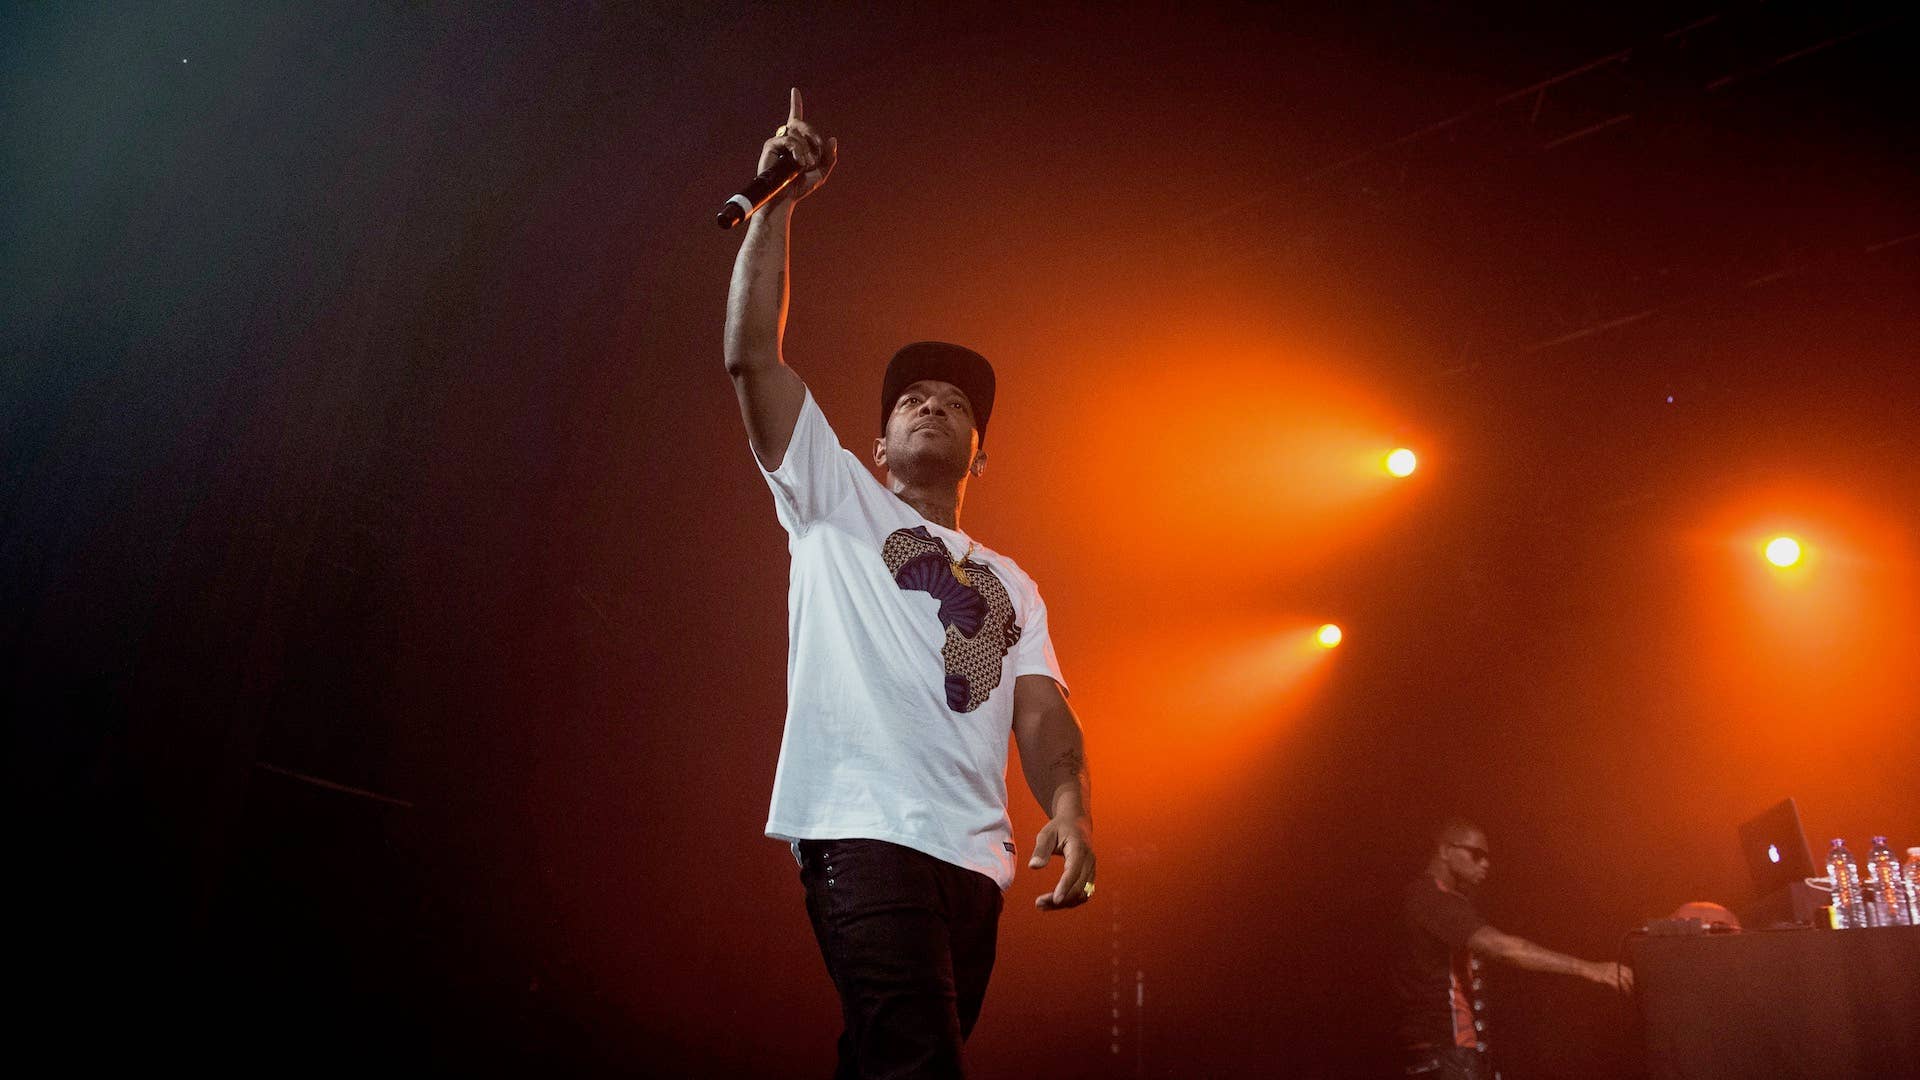 Prodigy from Mobb Deep performs at Le Trianon